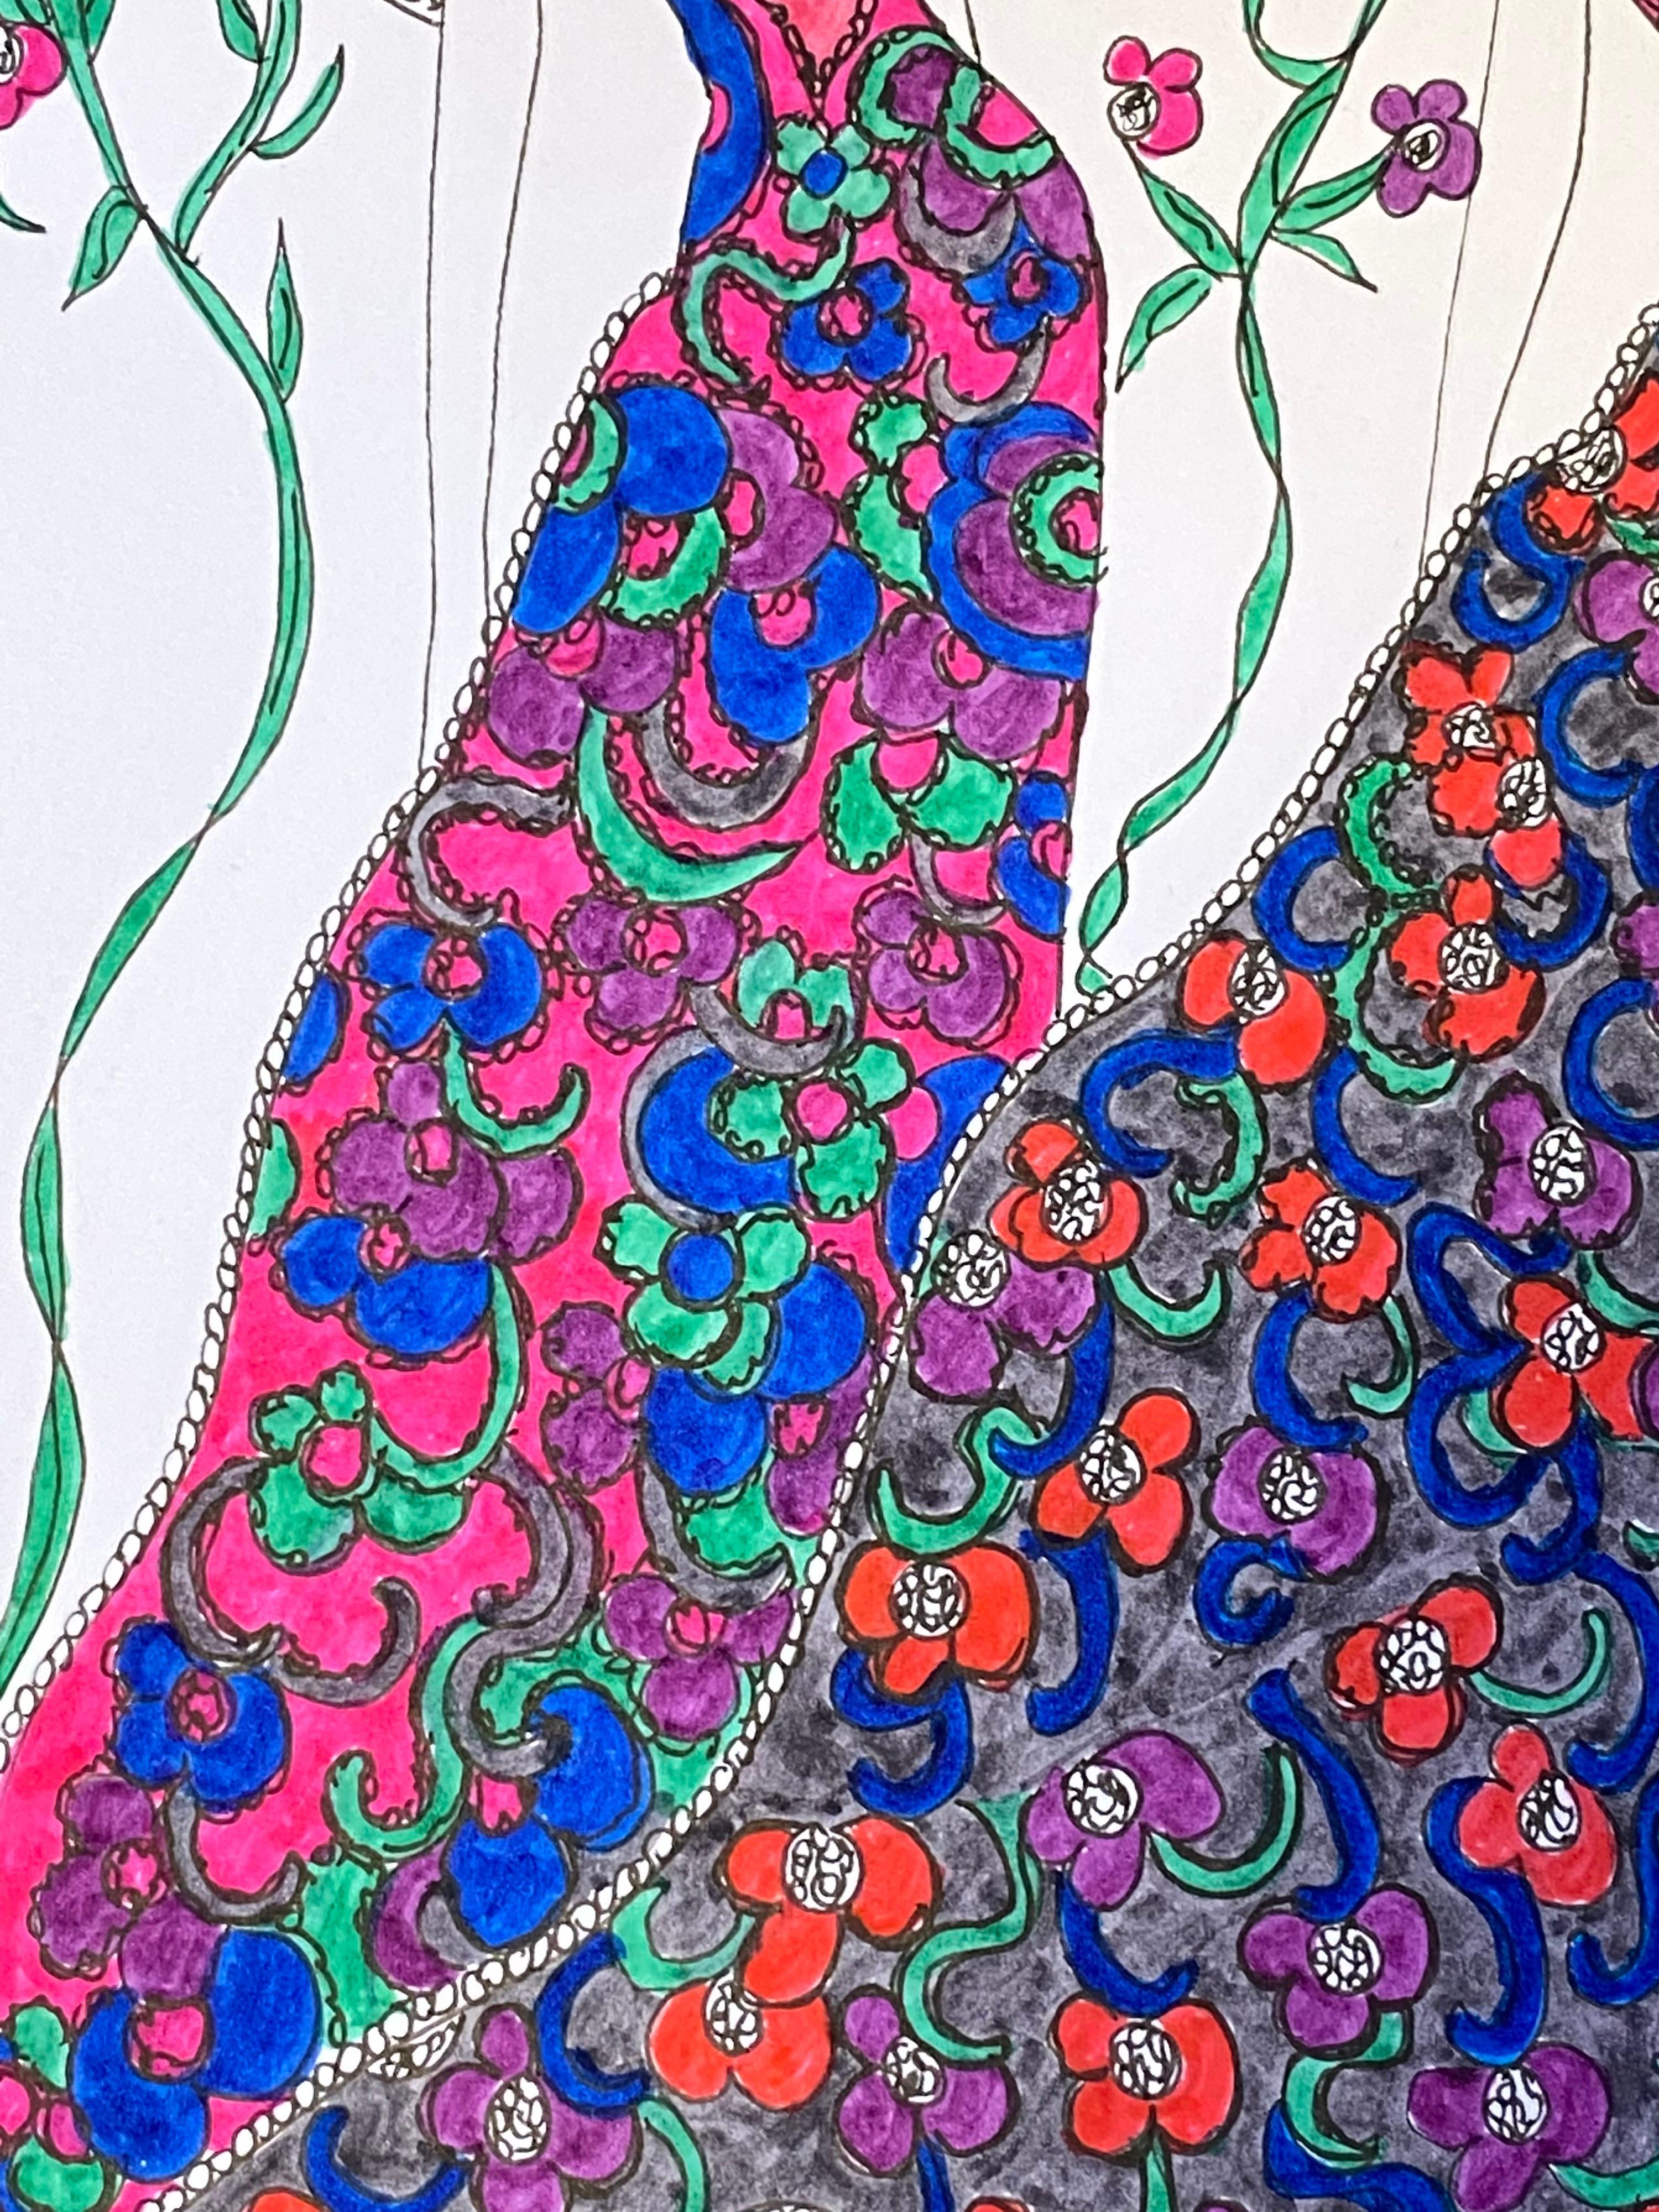 Original Fashion Design Illustration
by Roz Jennings, British
watercolor and ink on card, unframed
size: 12 x 8.25 inches
condition: very good

A beautifully colorful and characterful original artwork by British fashion designer, Roz Jennings.